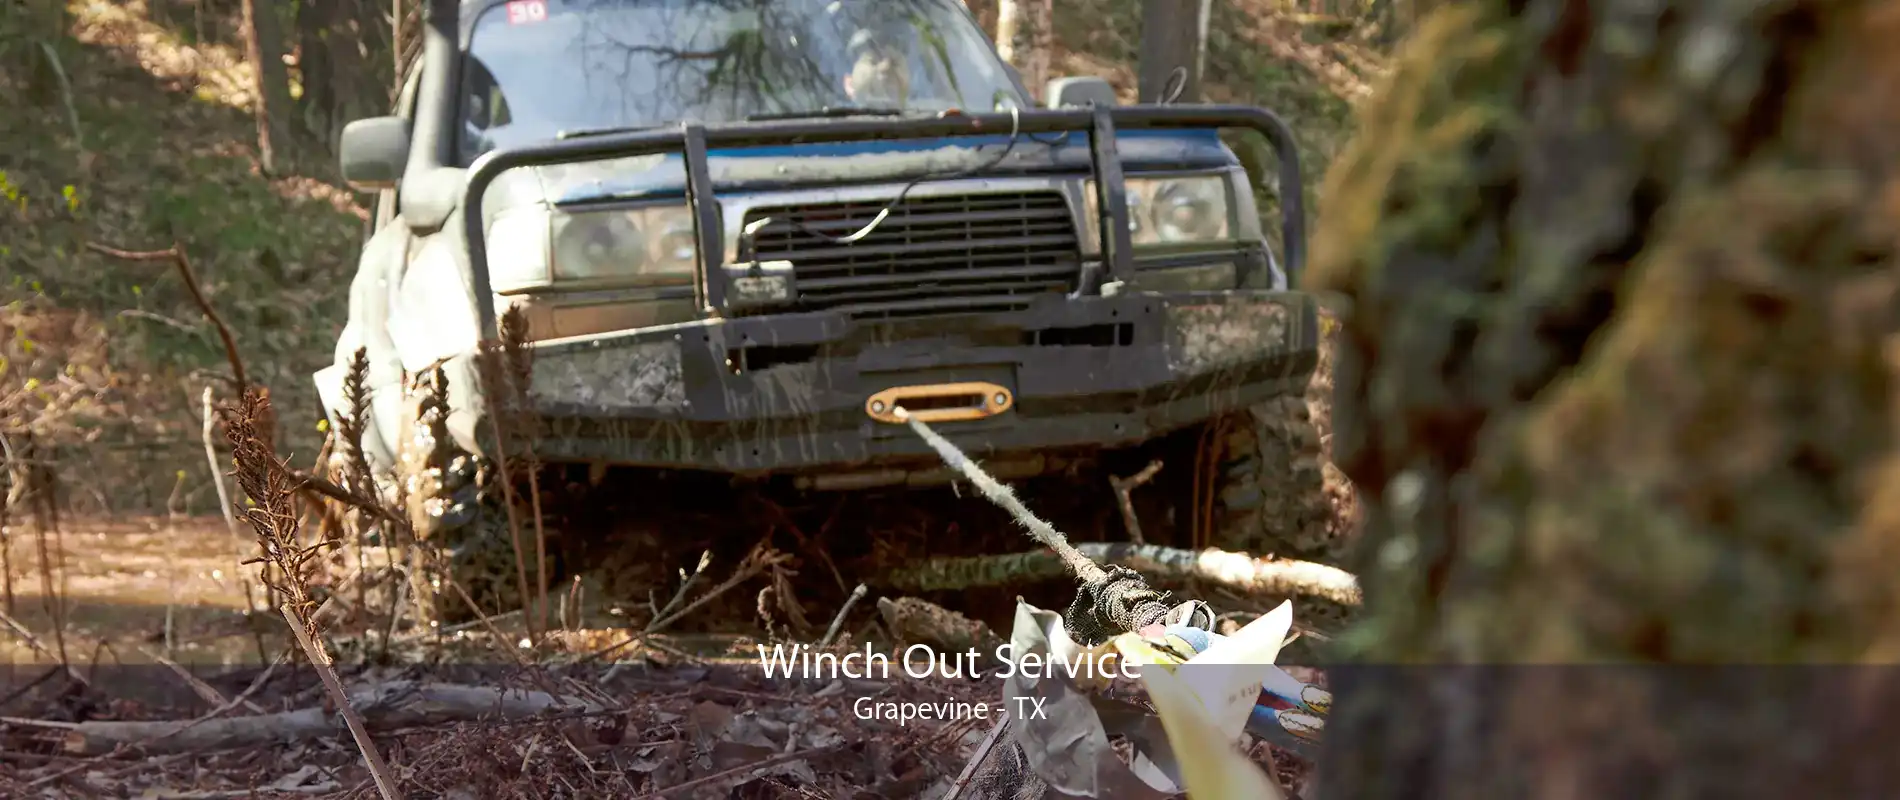 Winch Out Service Grapevine - TX